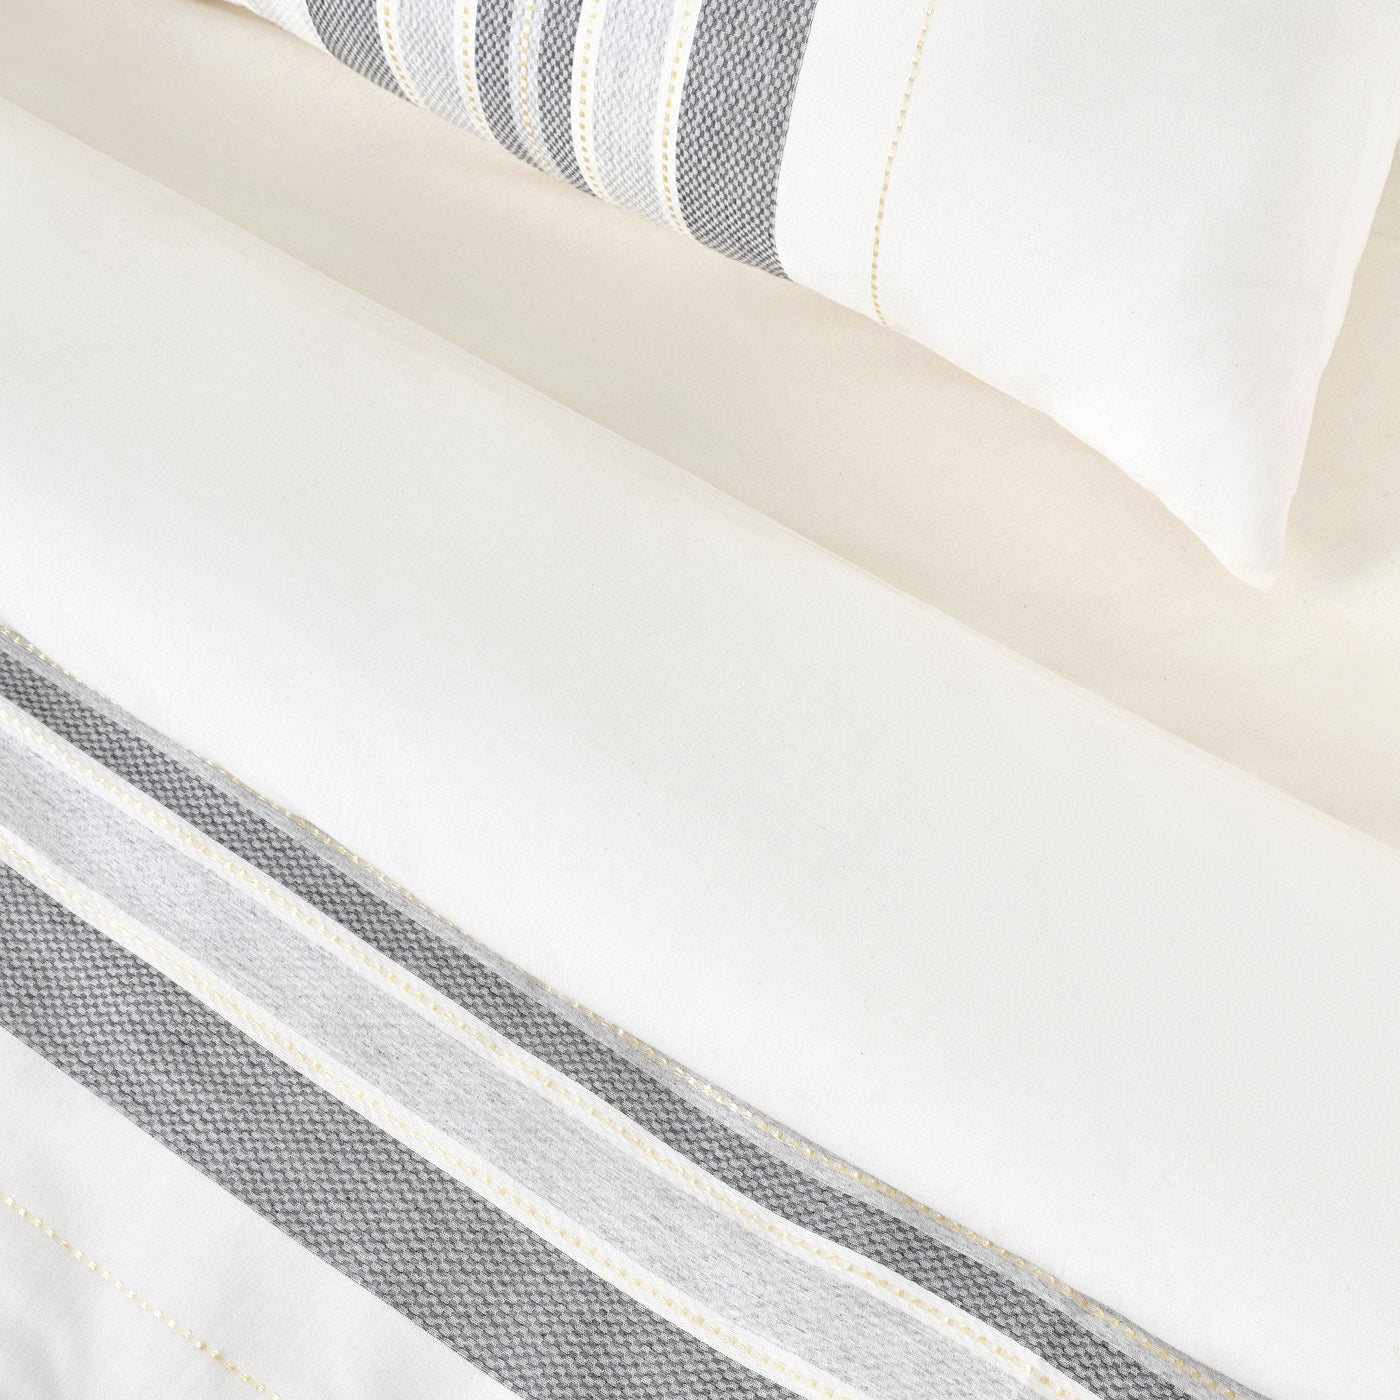 Cara Turkish Cotton Fitted Sheet, Off-White, King Size Bed Sheets sazy.com